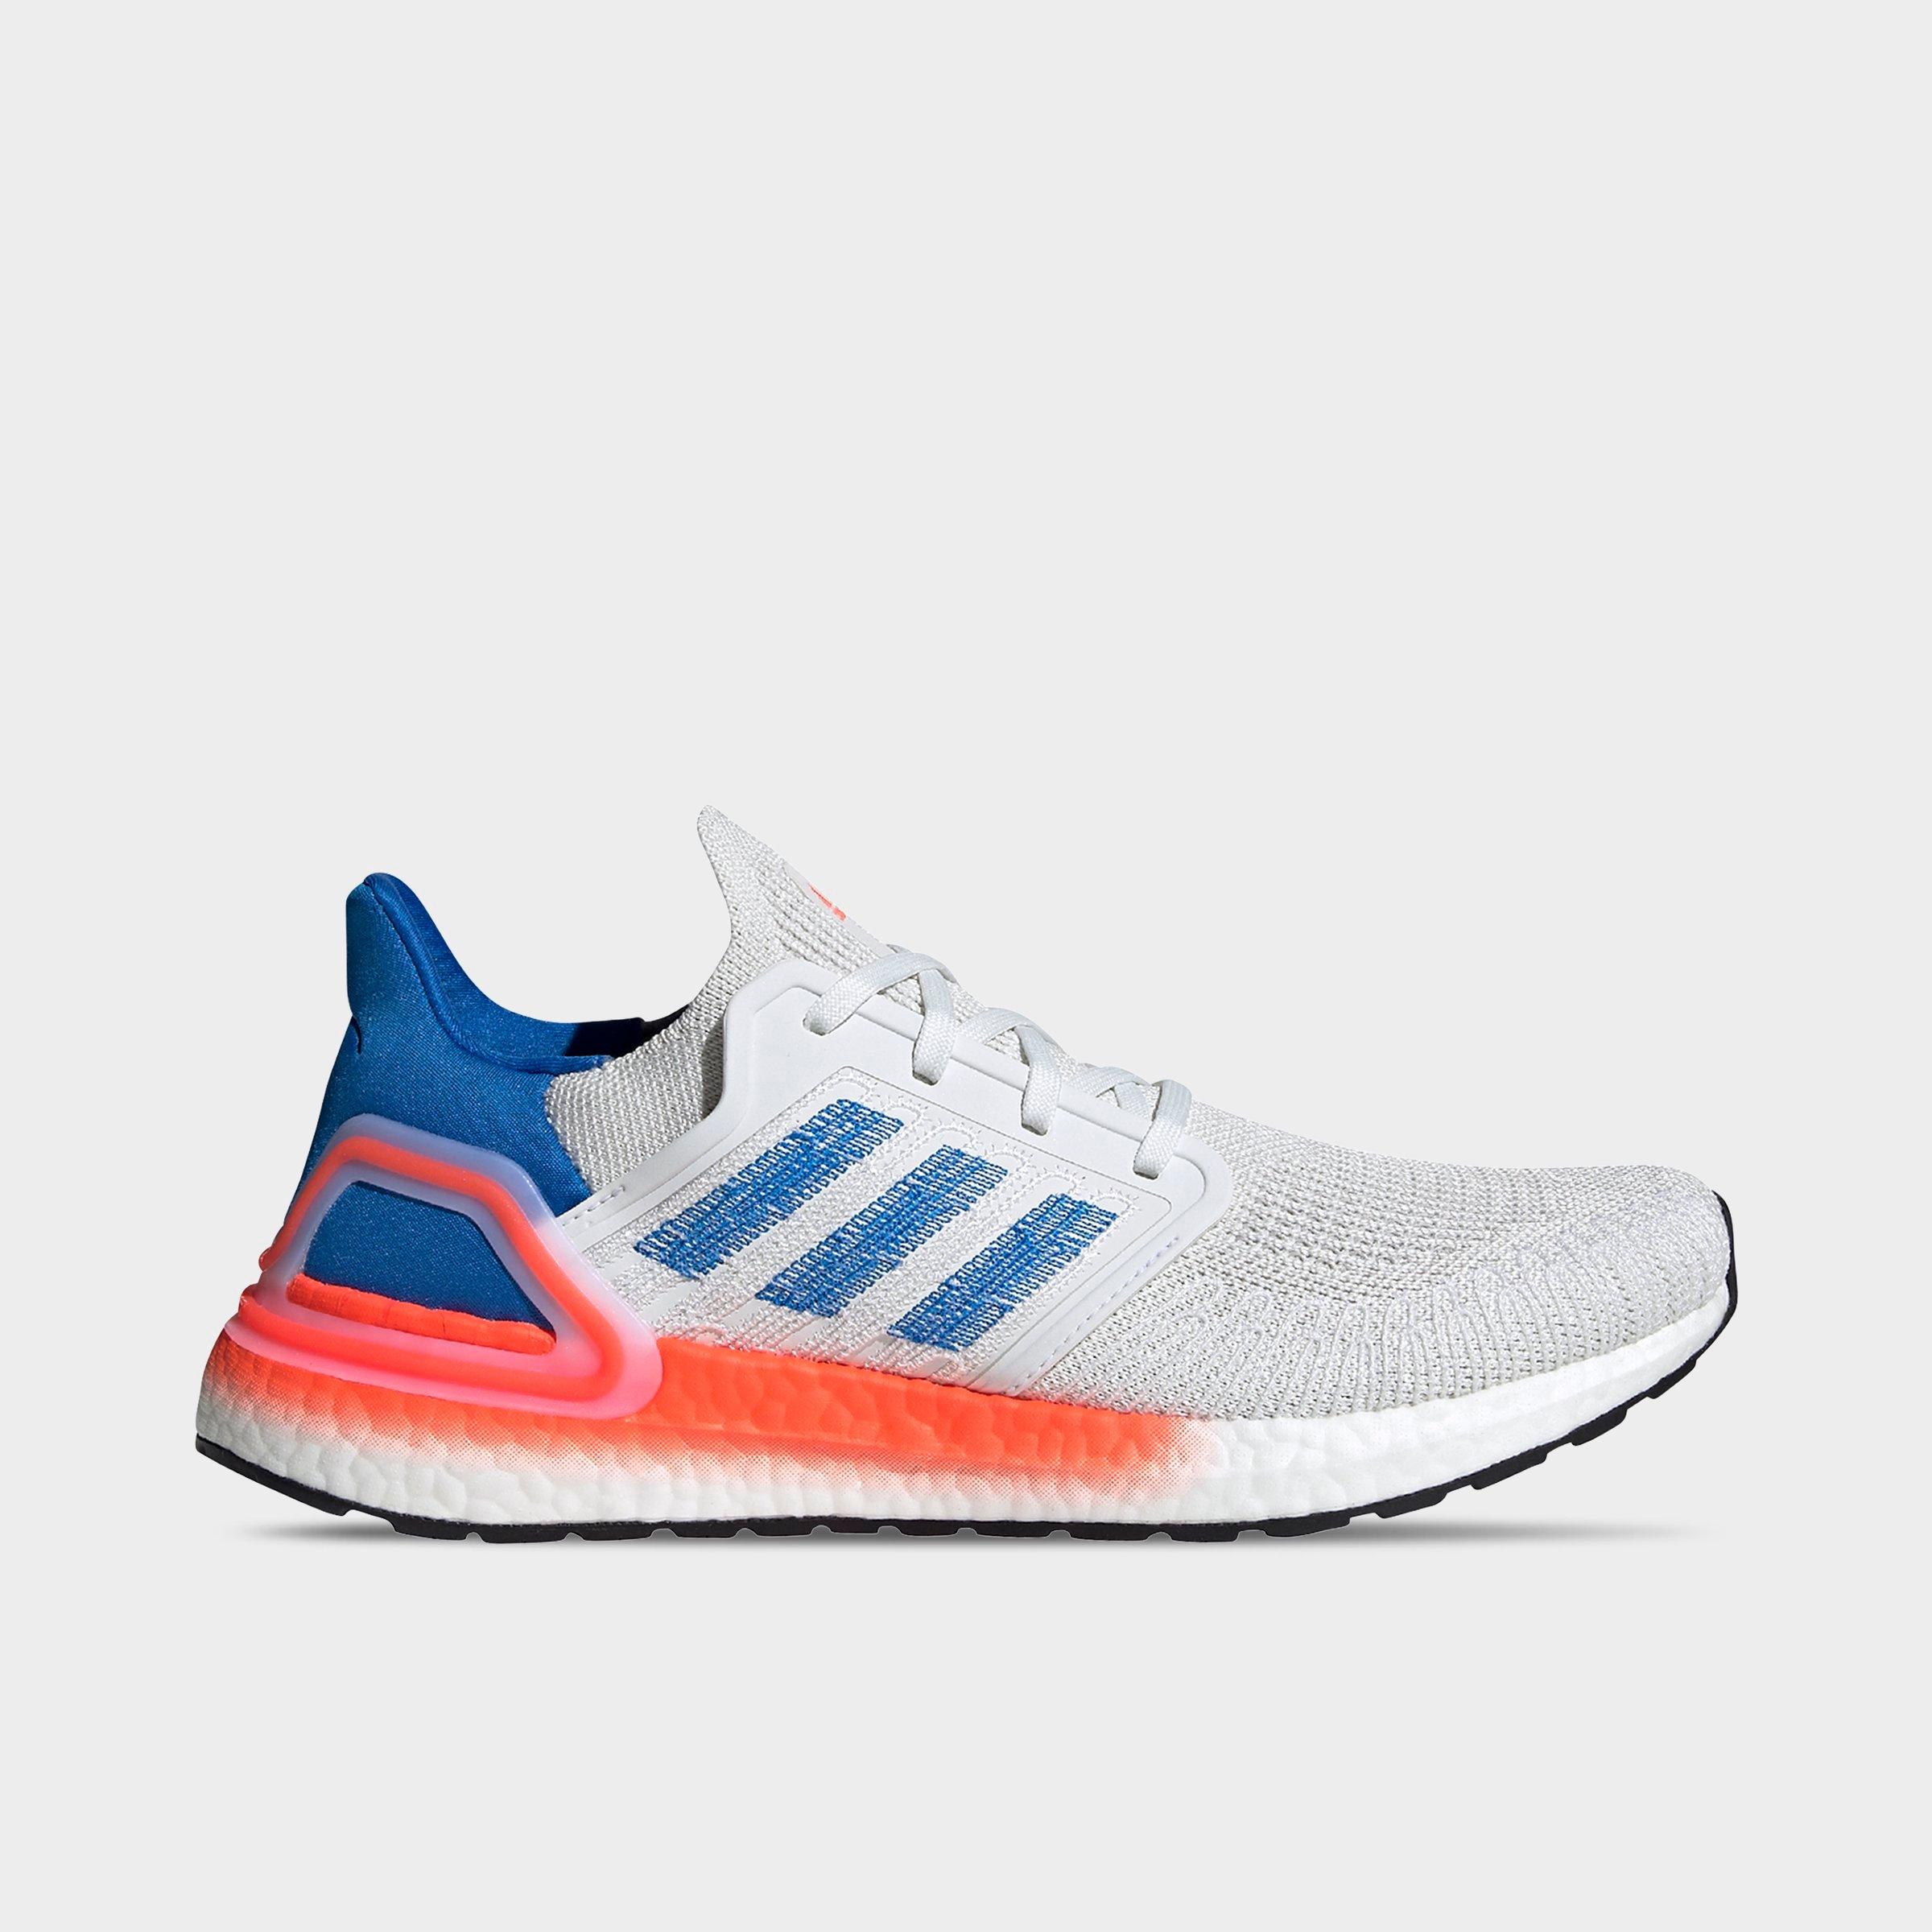 adidas shoes online discount